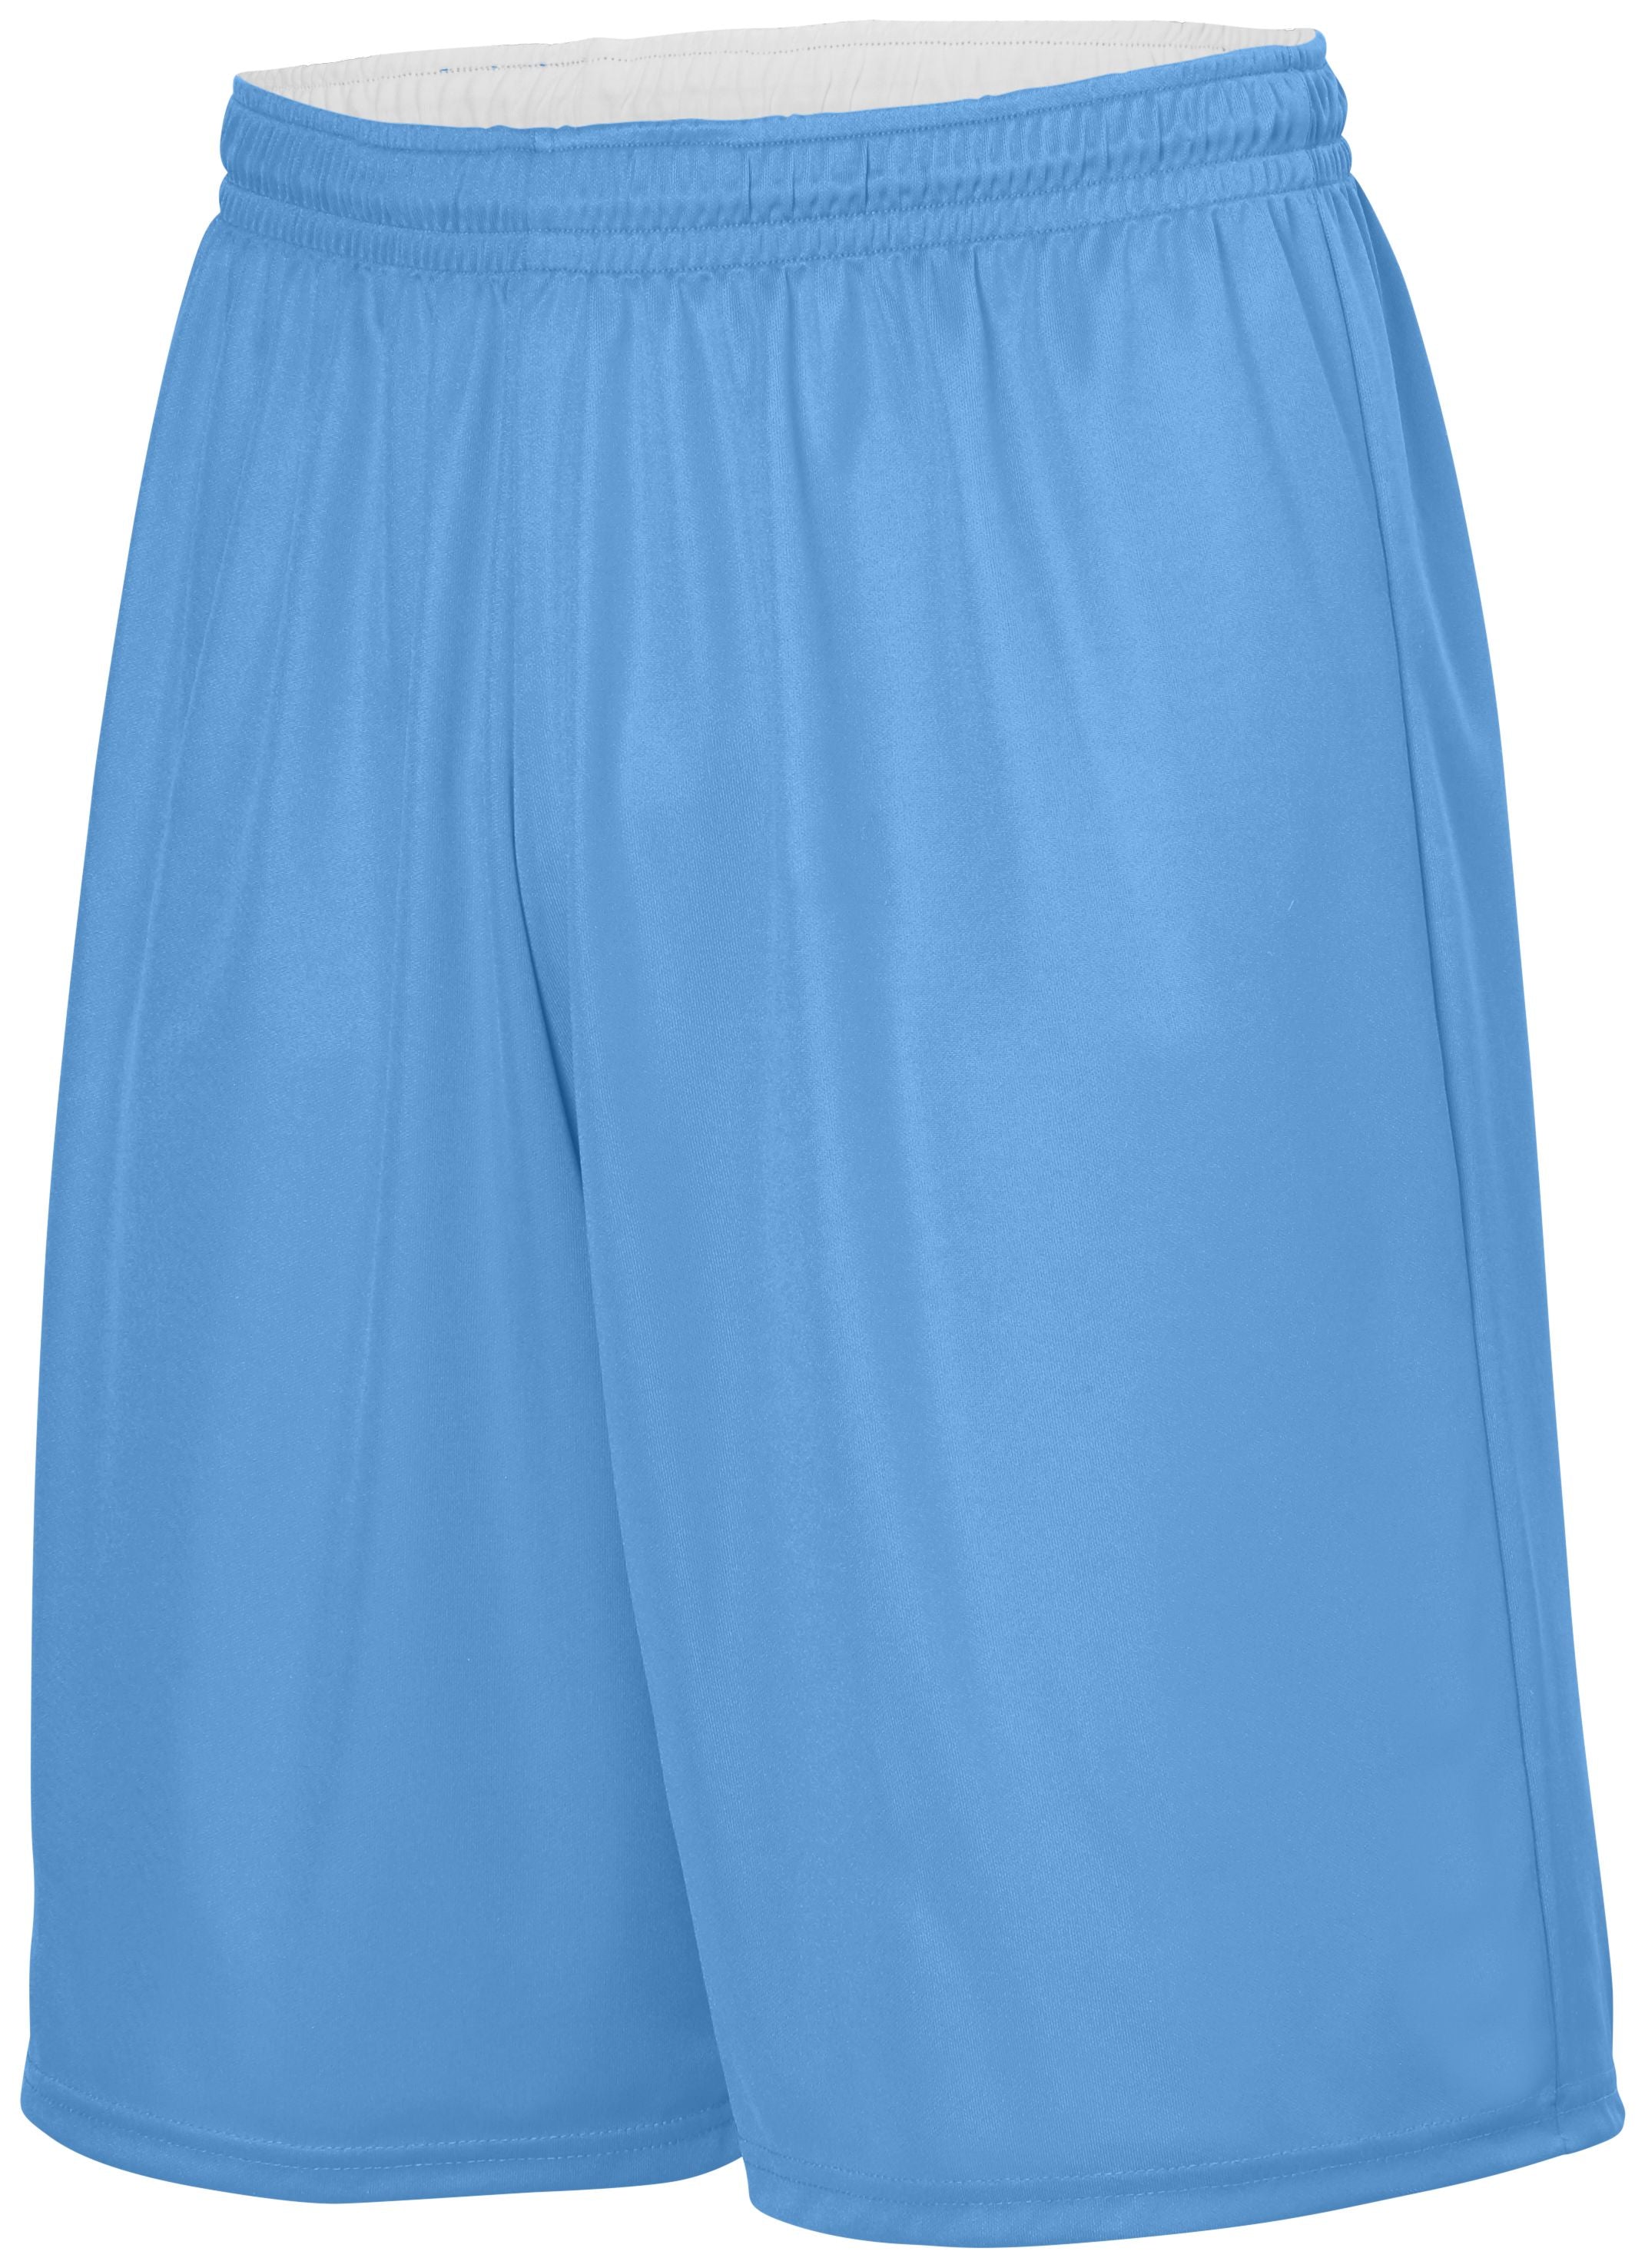 Augusta Sportswear Reversible Wicking Shorts in Columbia Blue/White  -Part of the Adult, Adult-Shorts, Augusta-Products, Basketball, All-Sports, All-Sports-1 product lines at KanaleyCreations.com